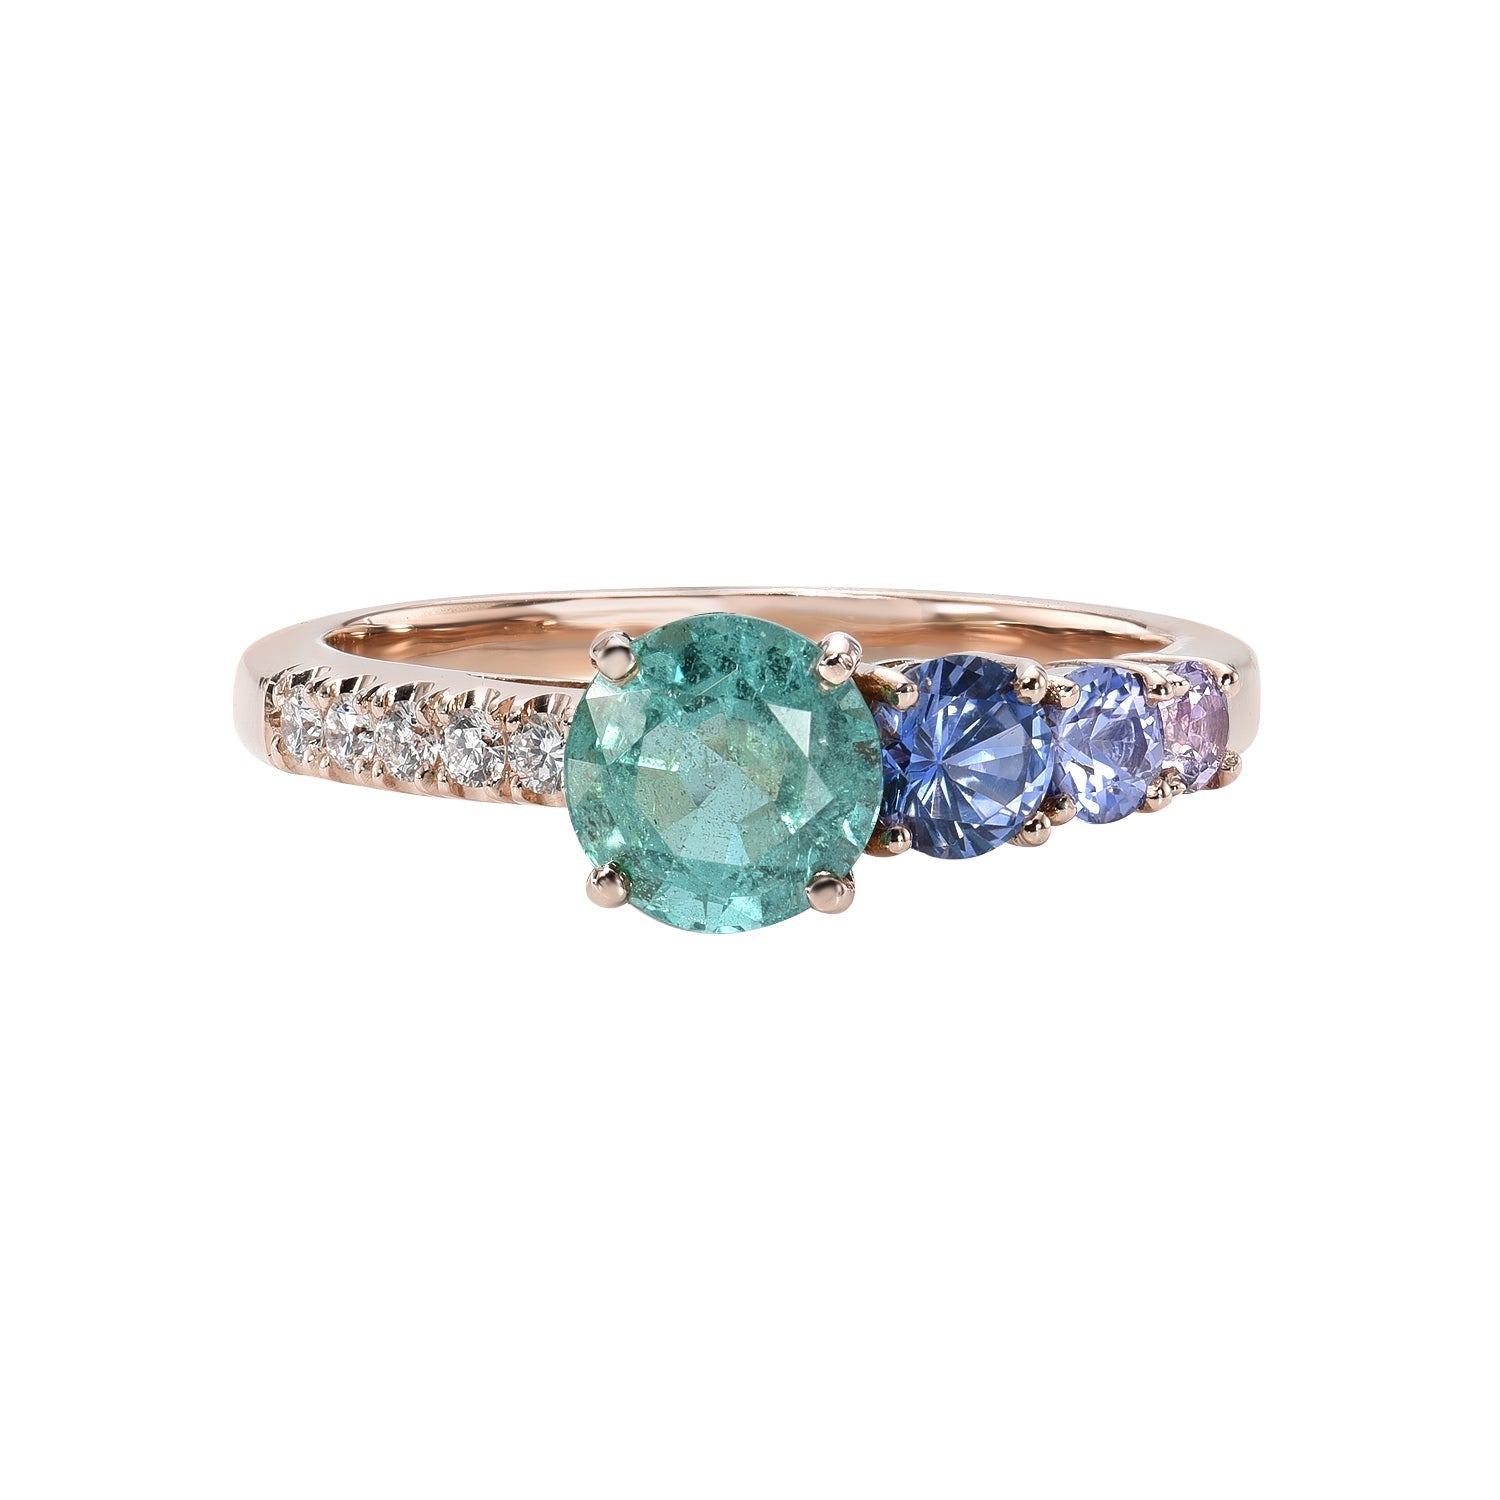 A Colombian Emerald Ring by NIXIN Jewelry against a white background. The emerald and diamond ring also has purple sapphires set in rose gold.